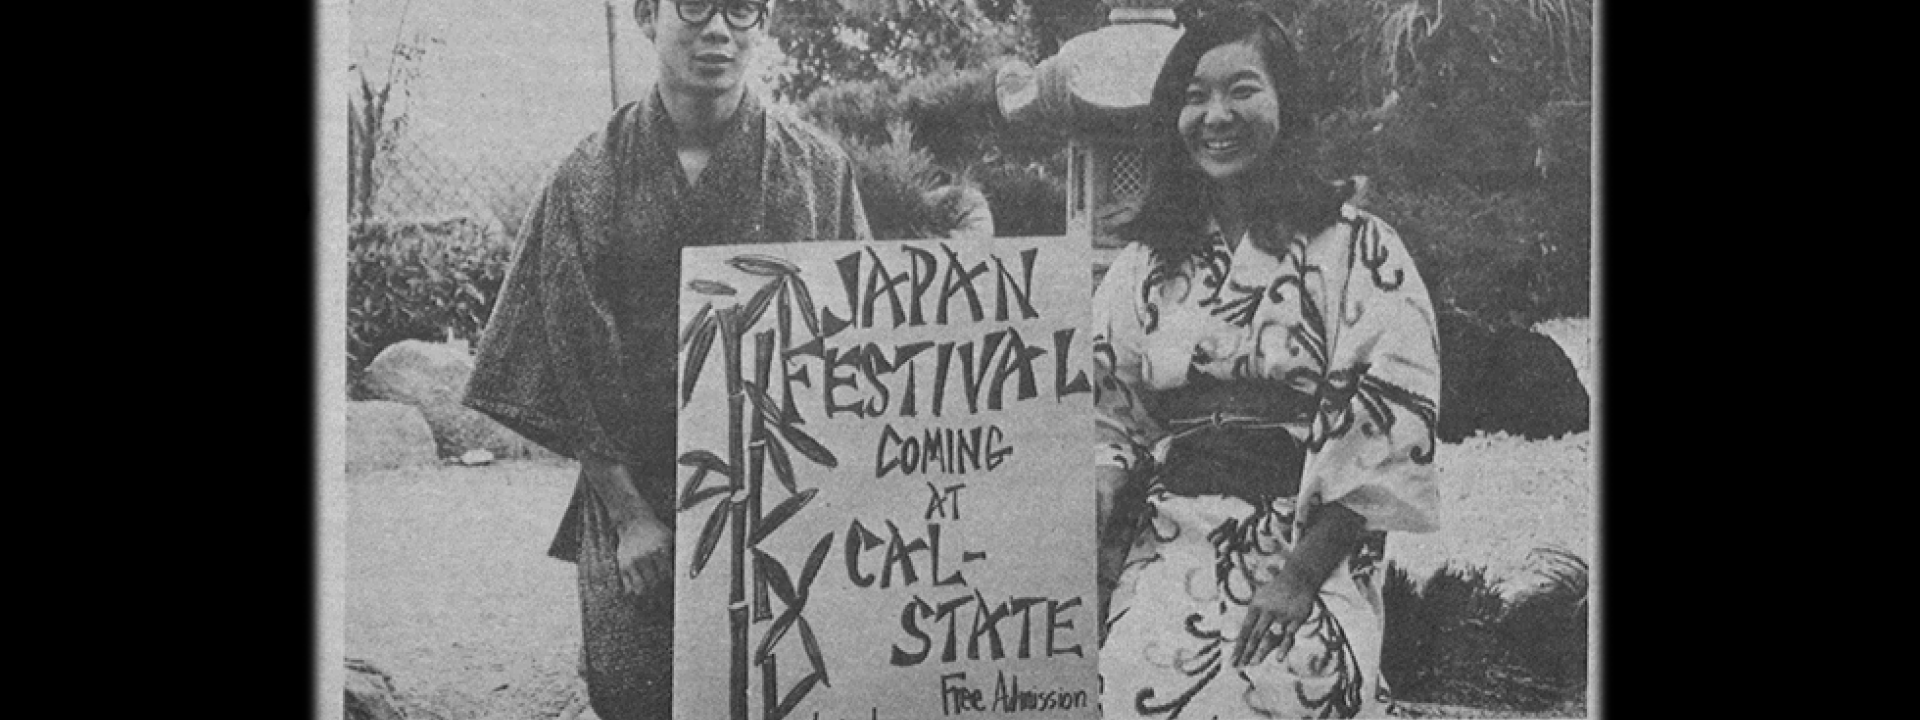 Two students posing in kimonos for Japan Night at Cal State LA in the 1960s